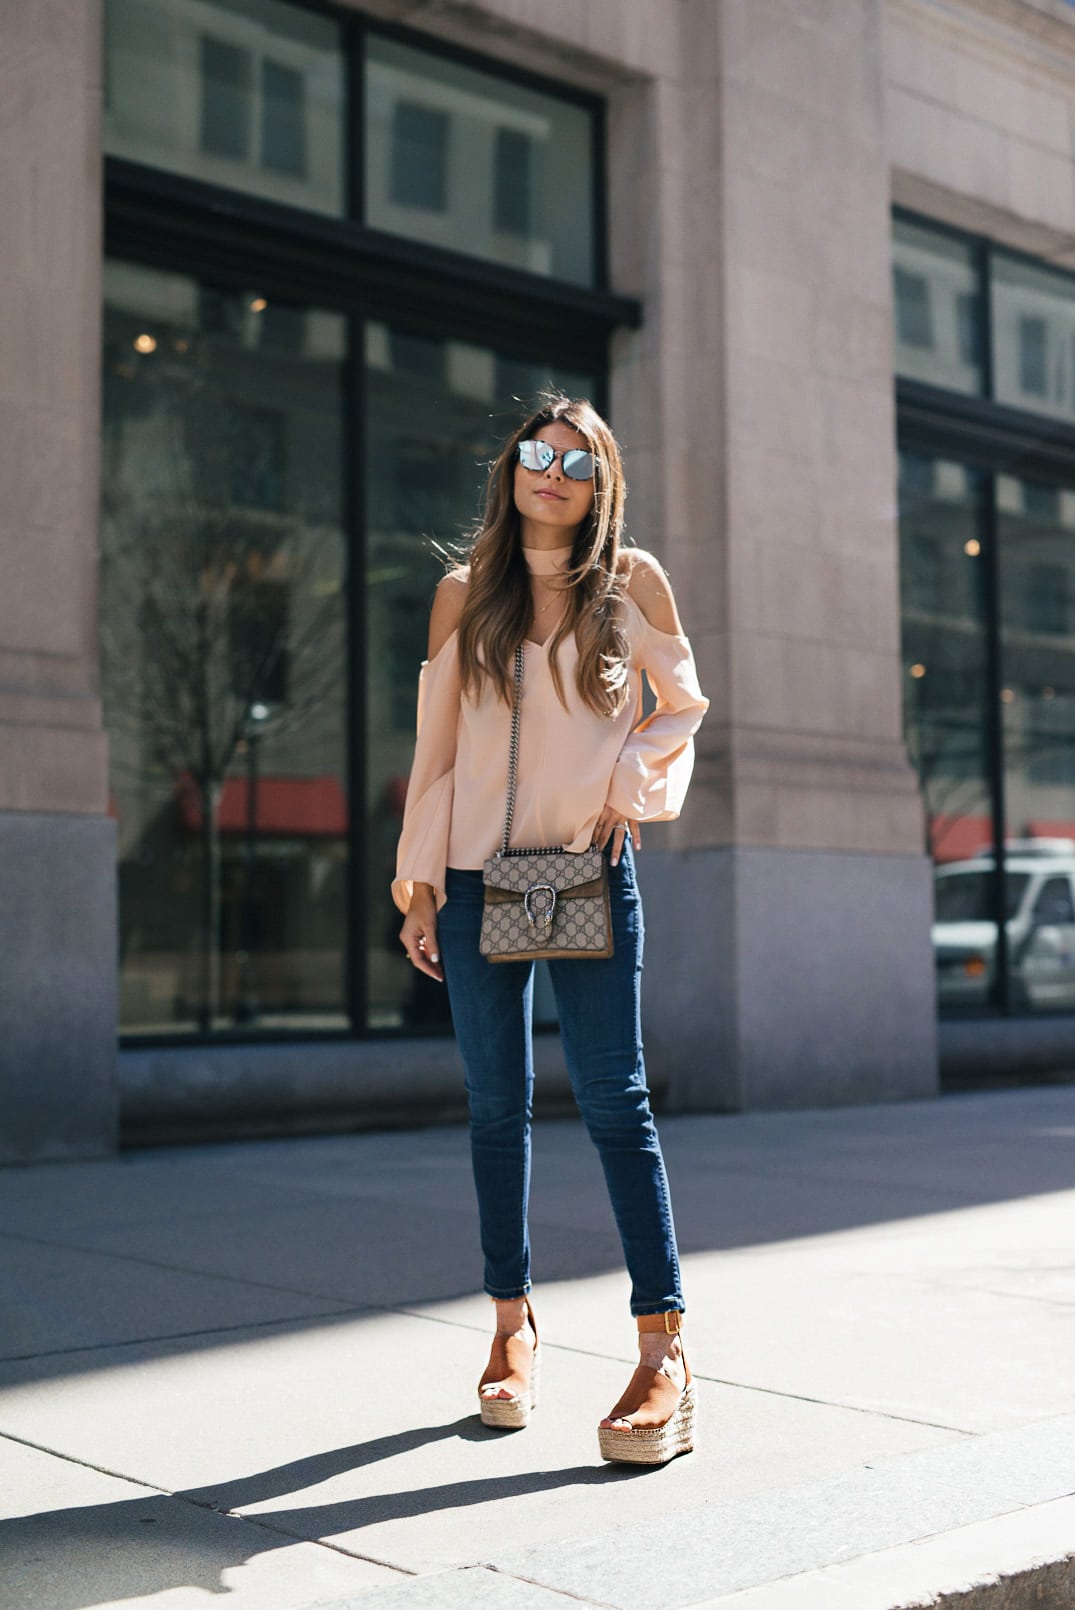 kinders keepers cutout neck band top, madewell jeans, Chloe Wedge Espadrilles, Chanel j12 Watch , Guccy Dionysus bag, Dior abstract mirrored sunglasses